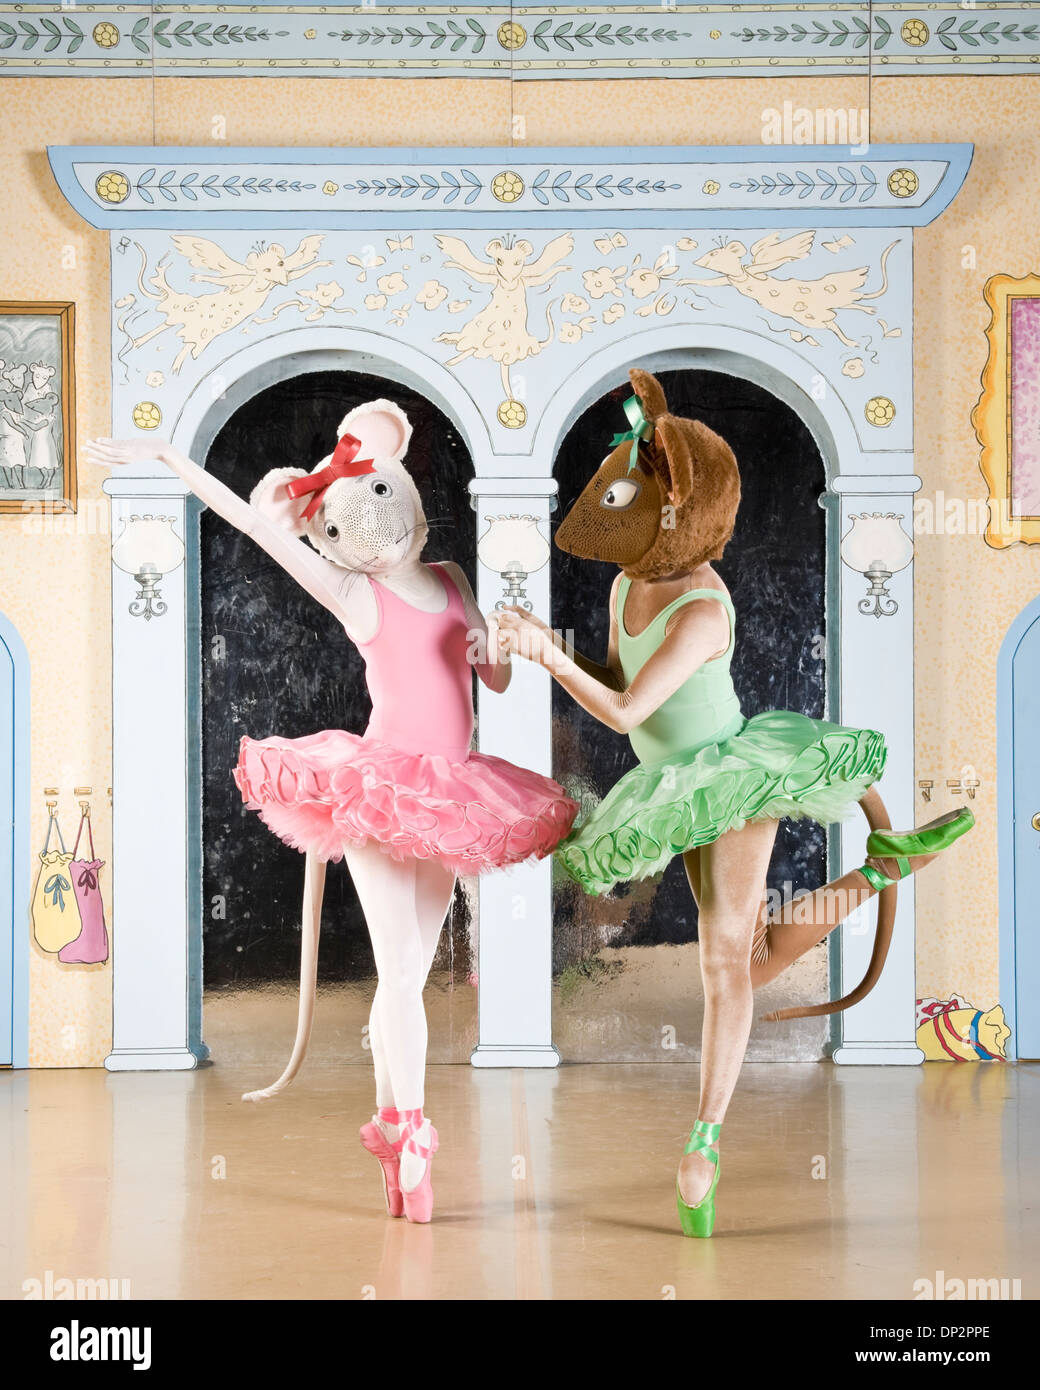 lounge Distribuere Udvalg Angelina Ballerina dancing on stage with her friend Stock Photo - Alamy